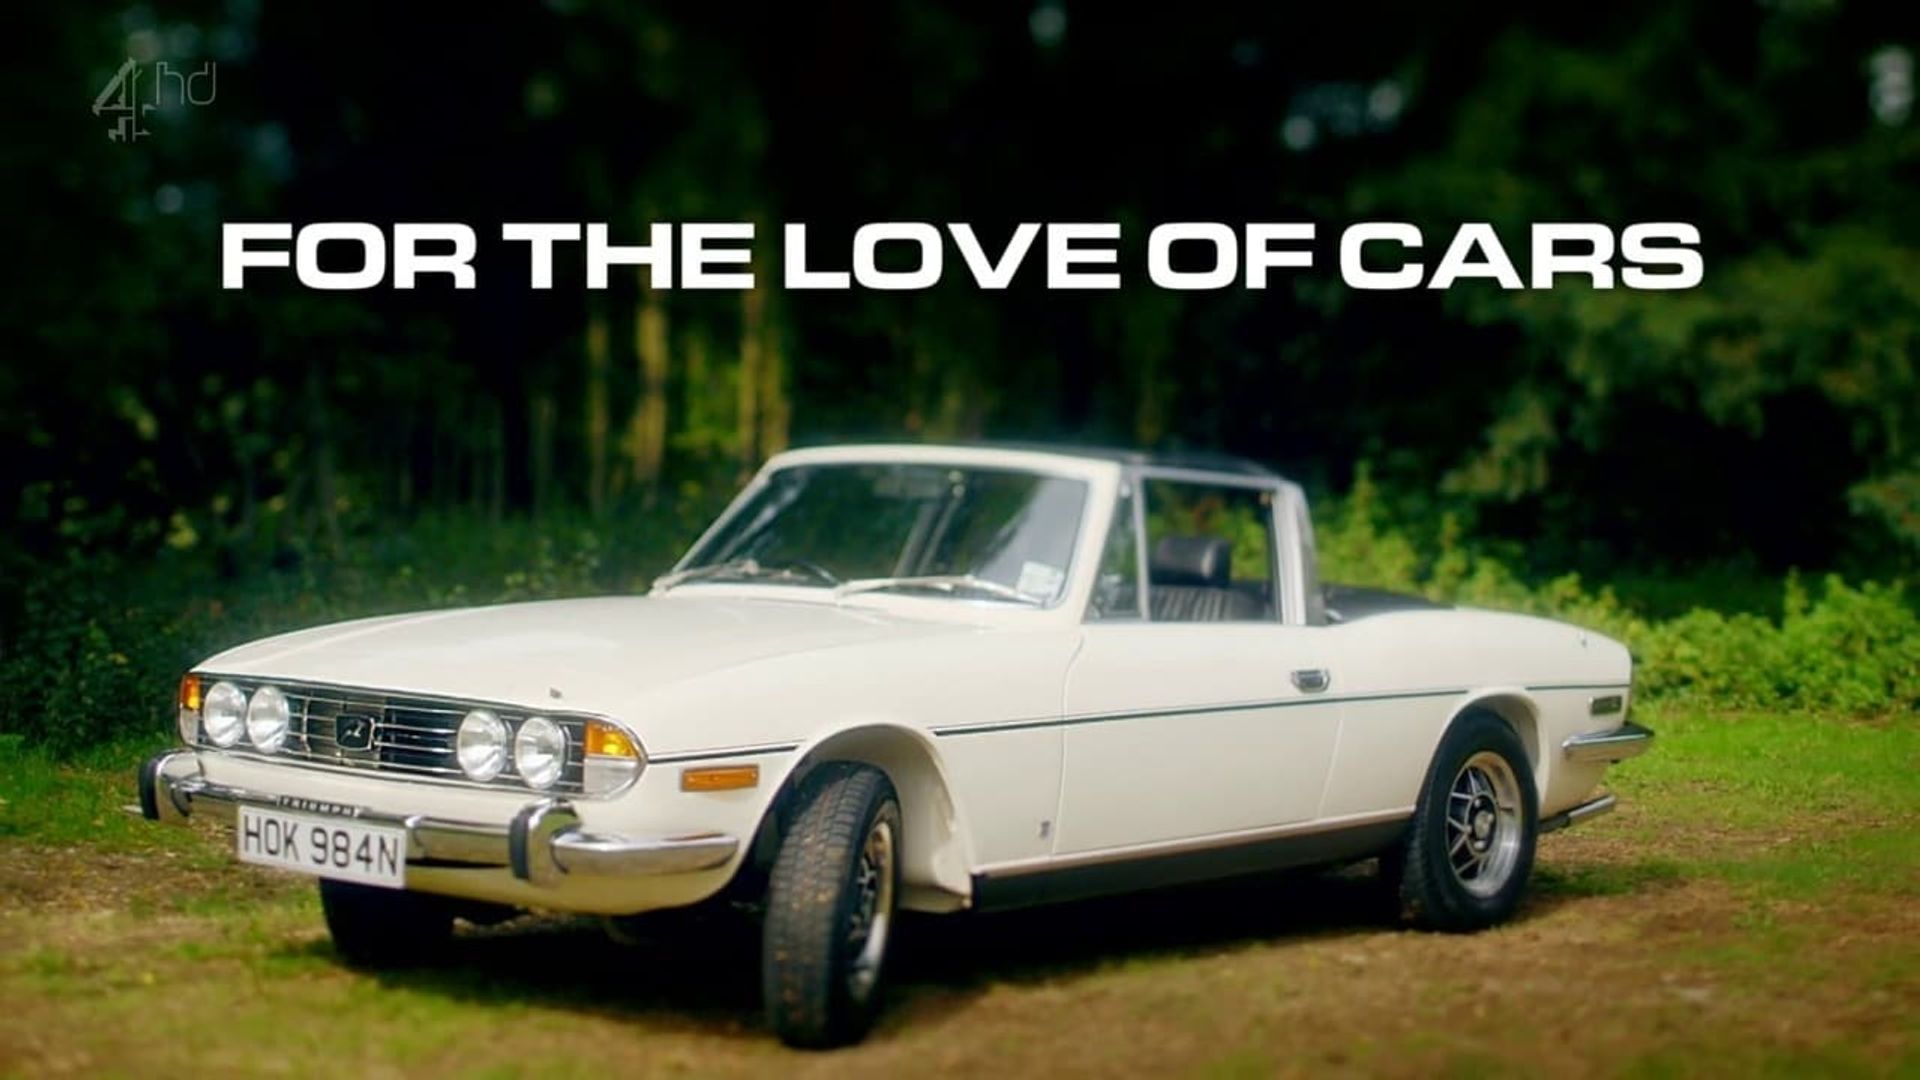 For the Love of Cars background